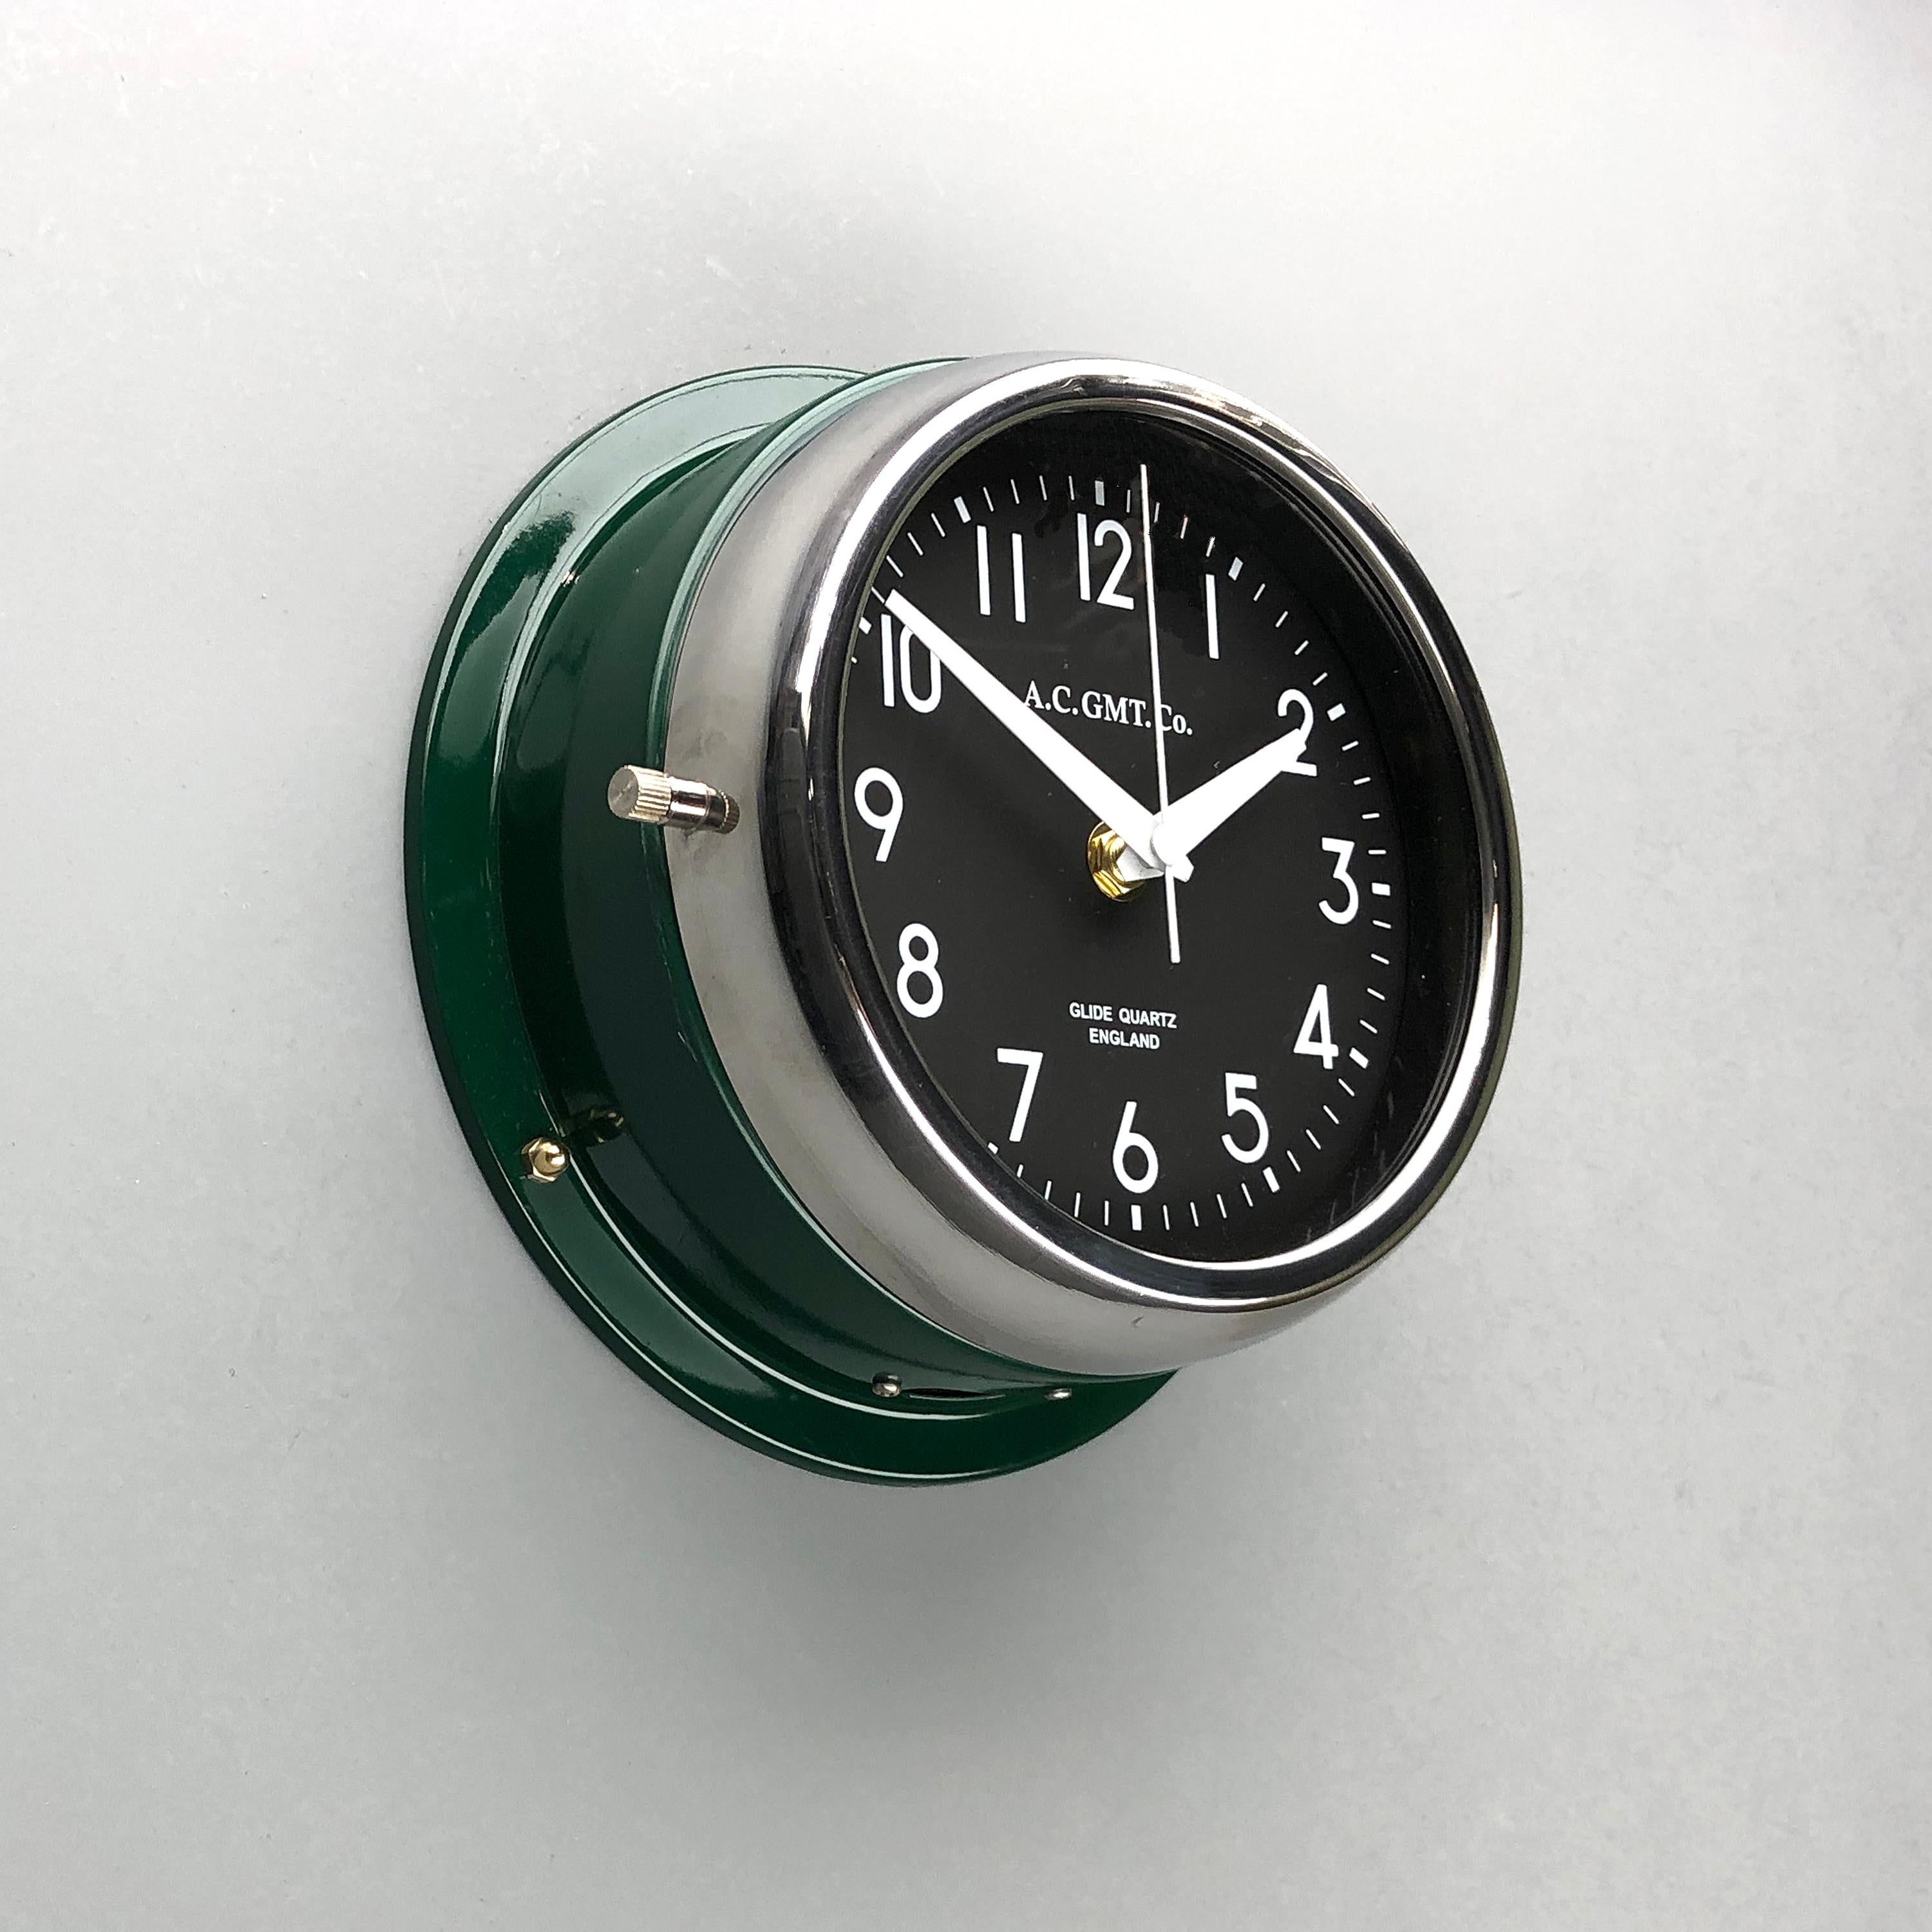 1970s British Racing Green AC.GMT.CO. Industrial Wall Clock Chrome Bezel  In Excellent Condition For Sale In Leicester, Leicestershire